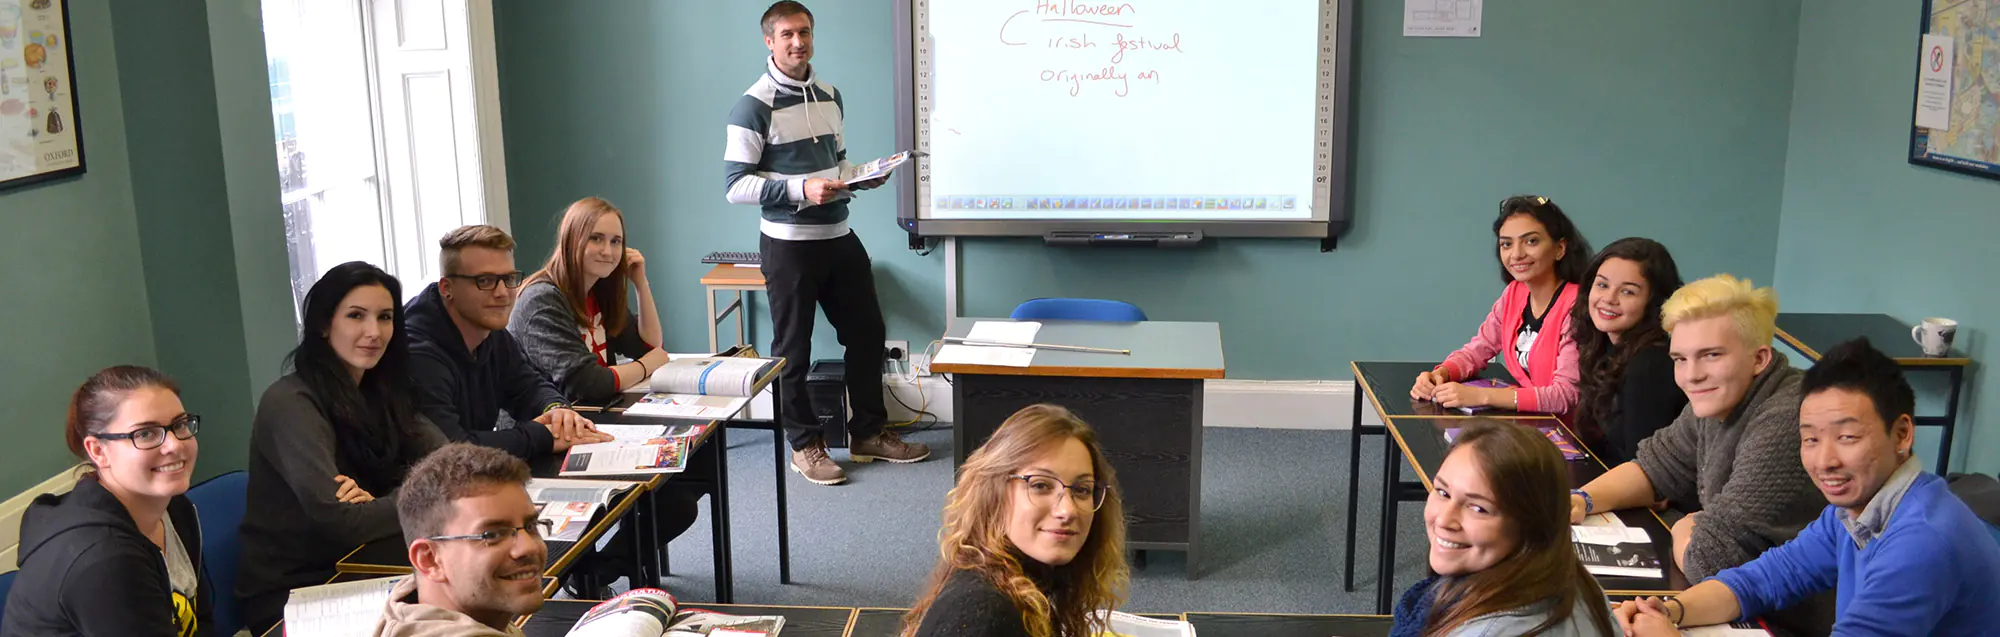 Cours The Horner School of English, dates et tarifs